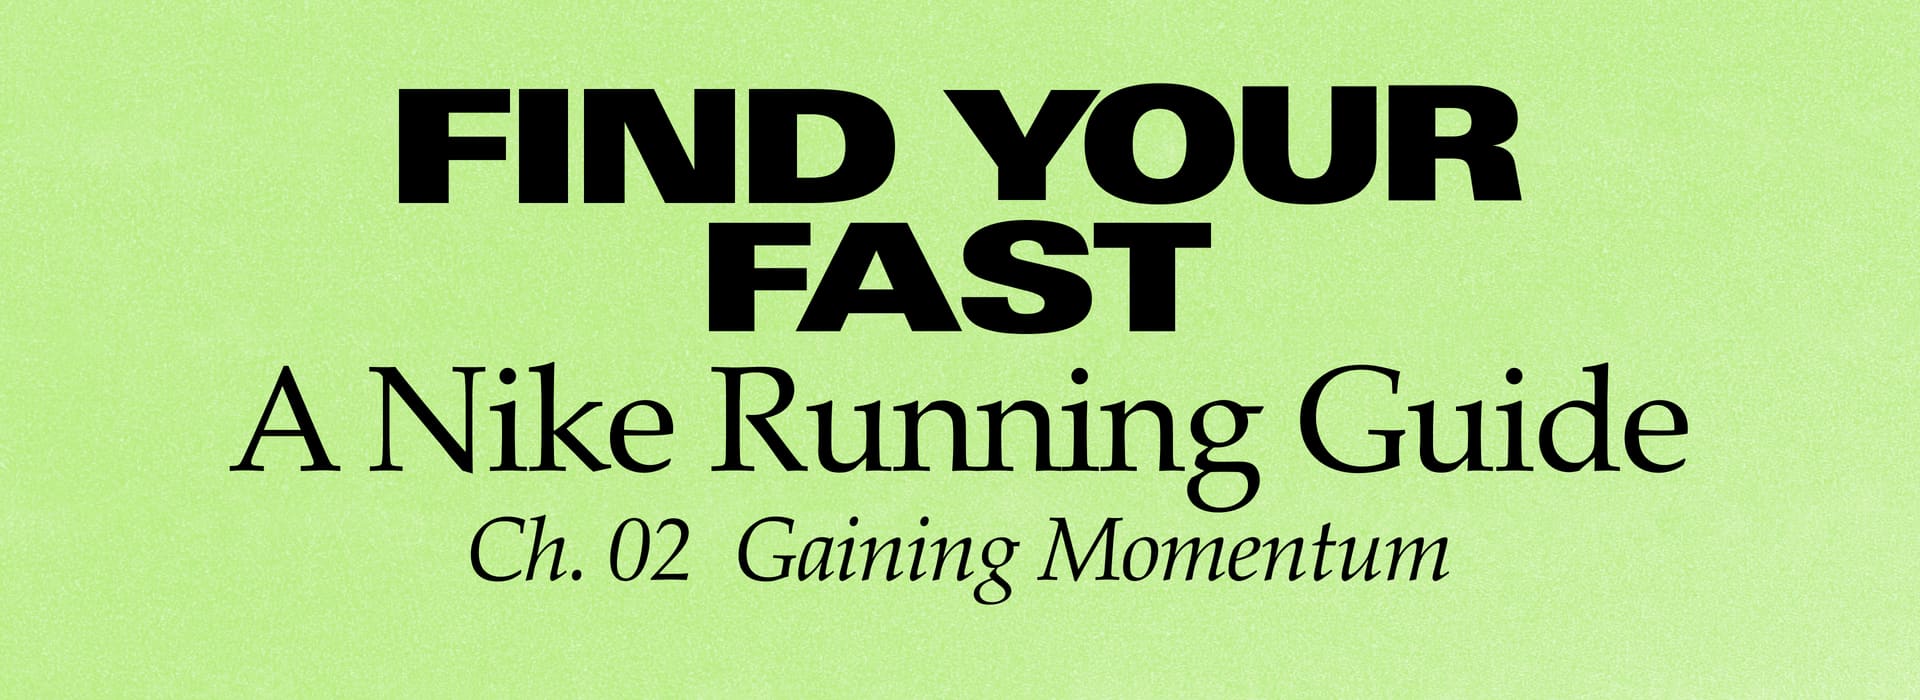 Find Your Chapter 2: Gaining Momentum. Nike.com